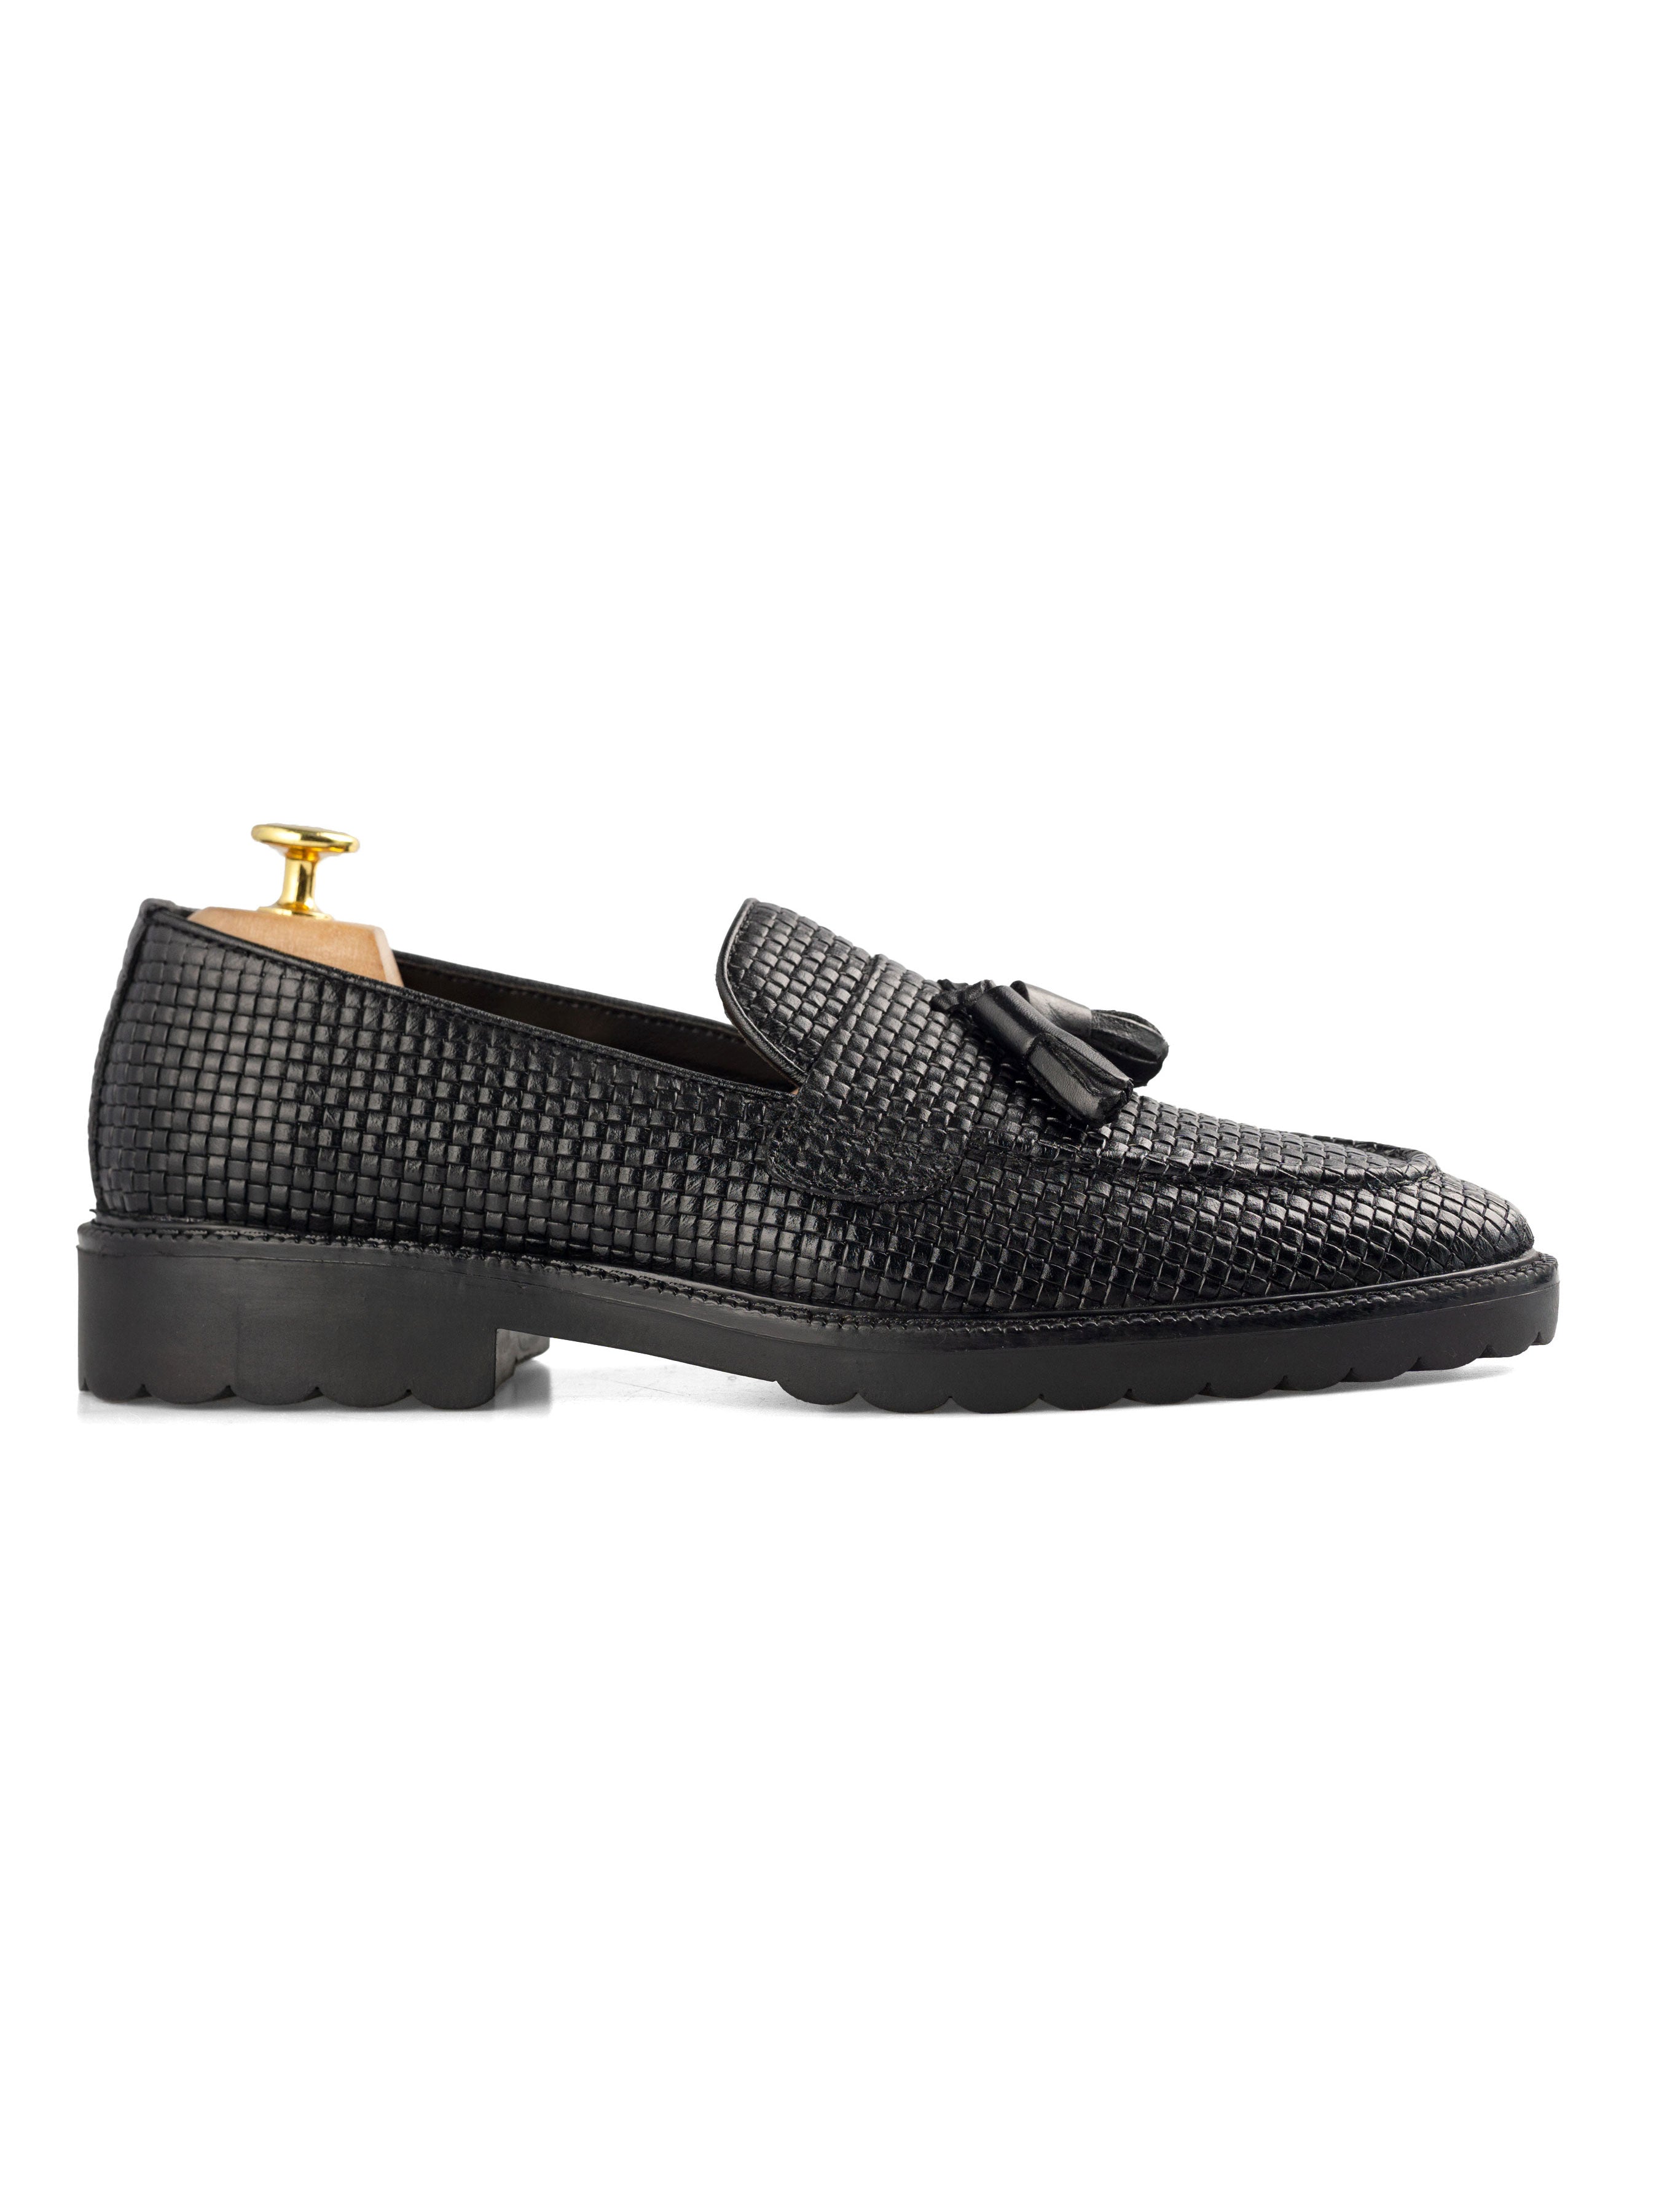 Rocky Tassel Loafer - Black Woven Leather (Combat Sole) - Zeve Shoes